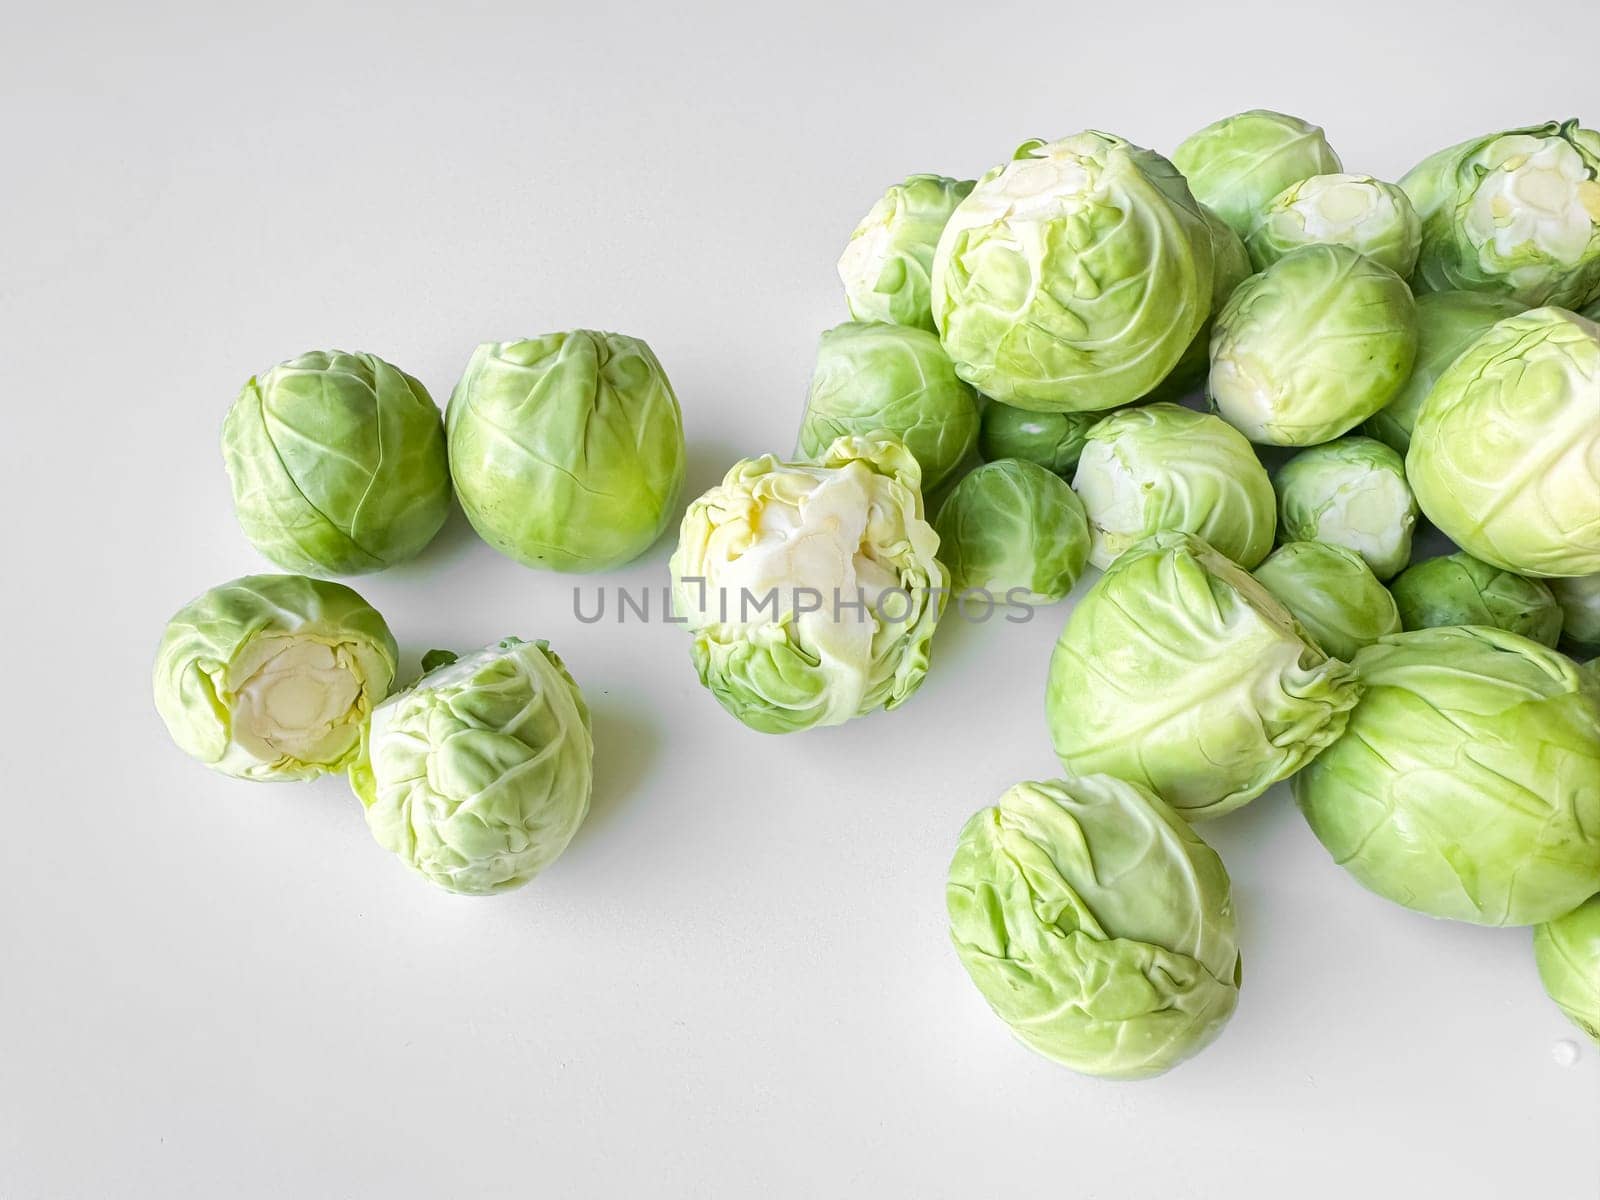 Fresh Brussels sprouts on white background, healthy green vegetable concept with copy space. High quality photo